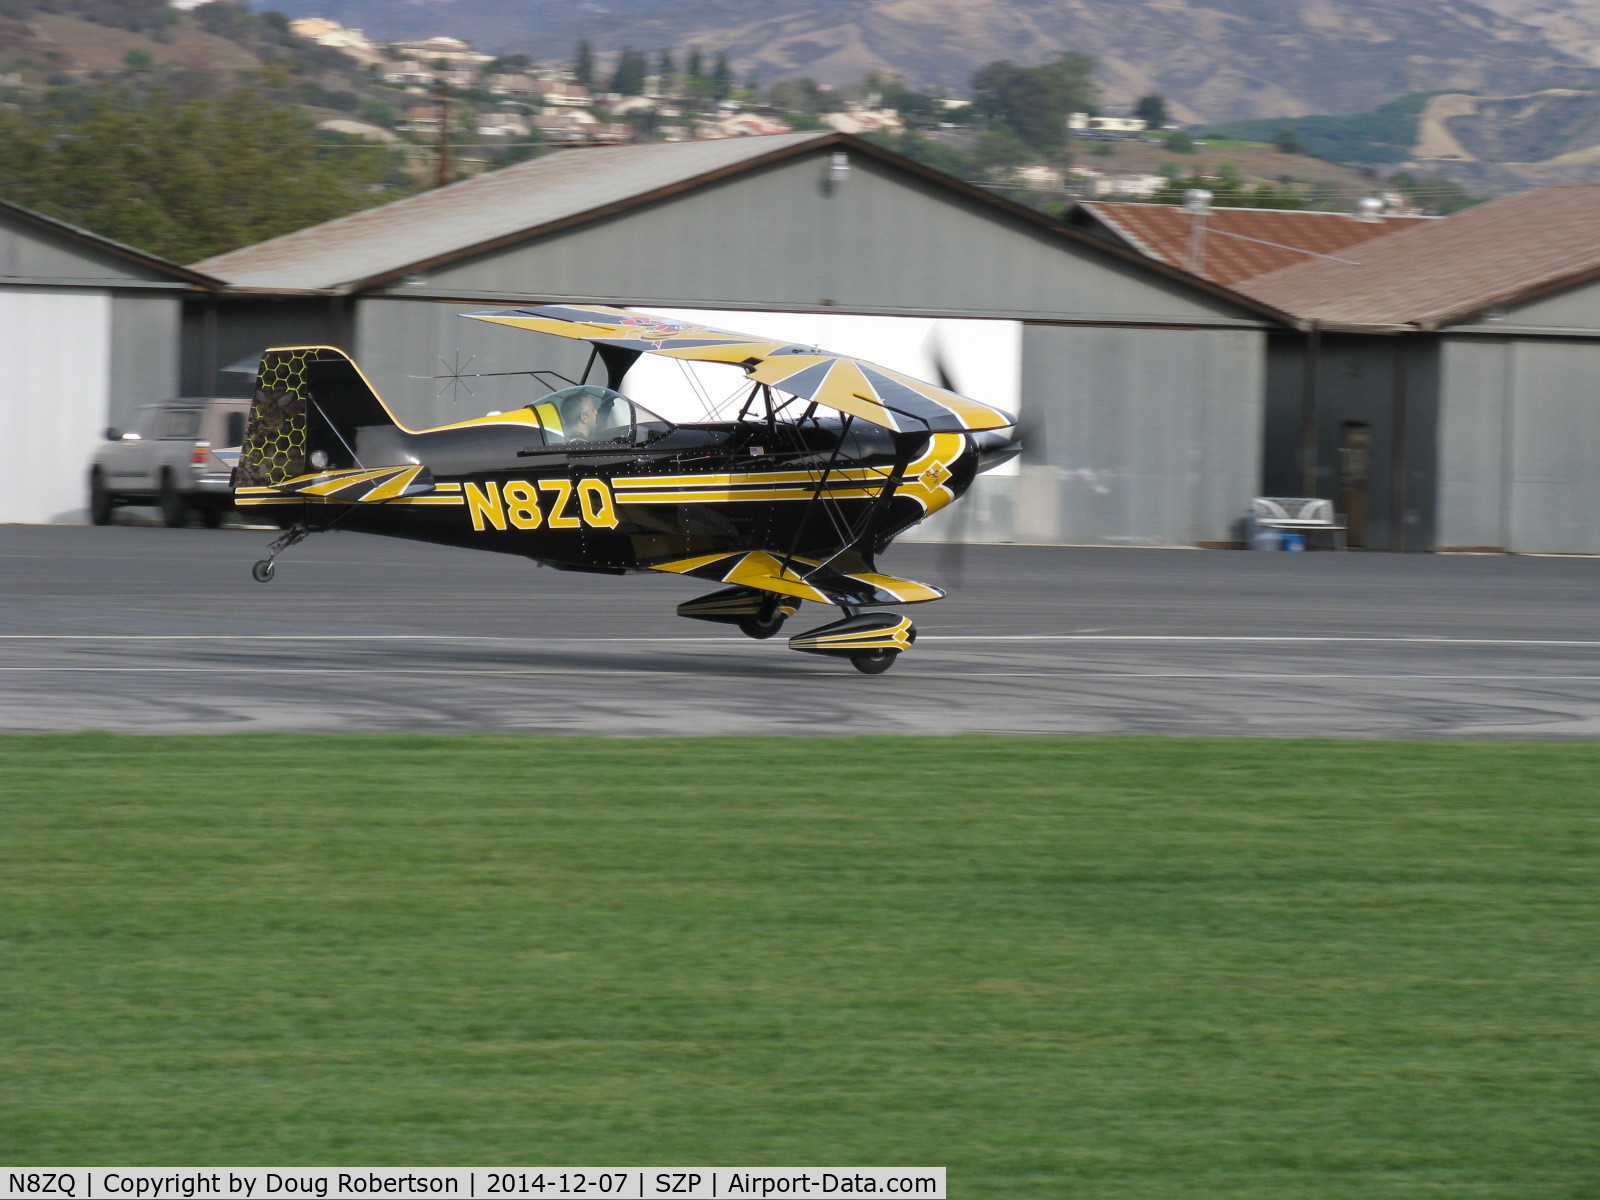 N8ZQ, 1999 Aviat Pitts S-2C Special C/N 6024, 1999 Aviat PITTS S-2C SPECIAL, Lycoming AEIO-540 260 Hp, landing Rwy 04